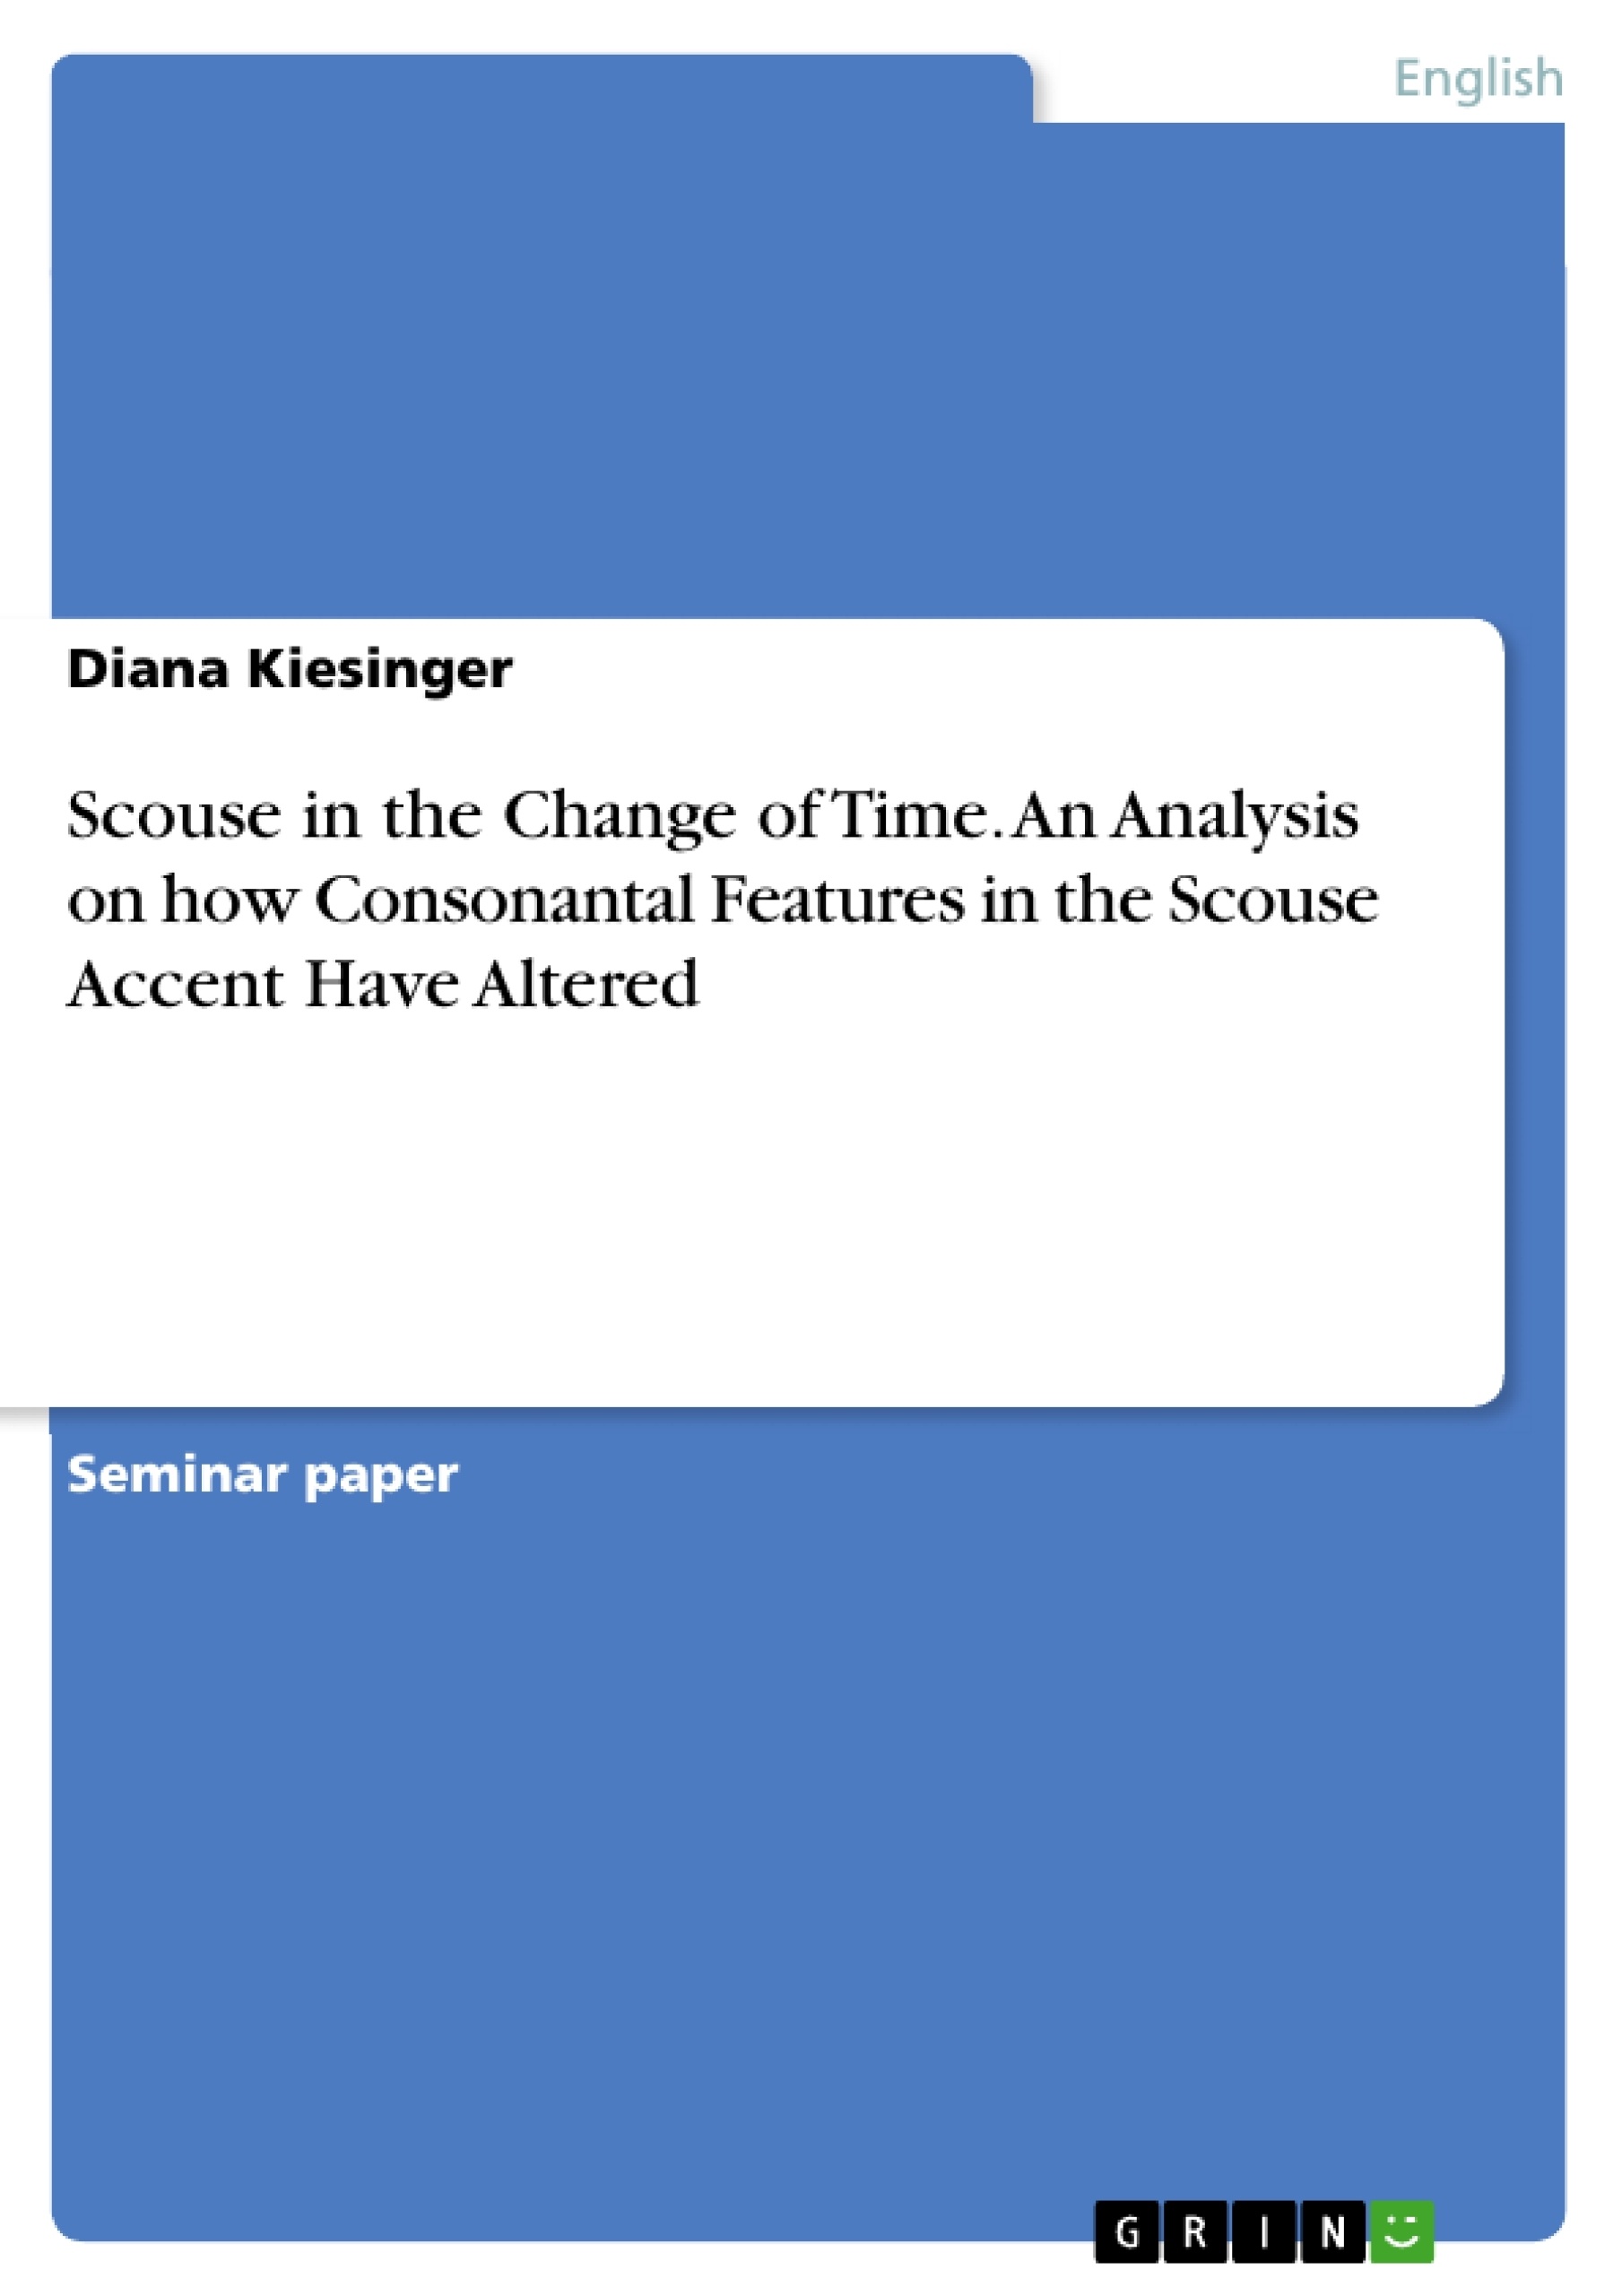 Titel: Scouse in the Change of Time. An Analysis on how Consonantal Features in the Scouse Accent Have Altered